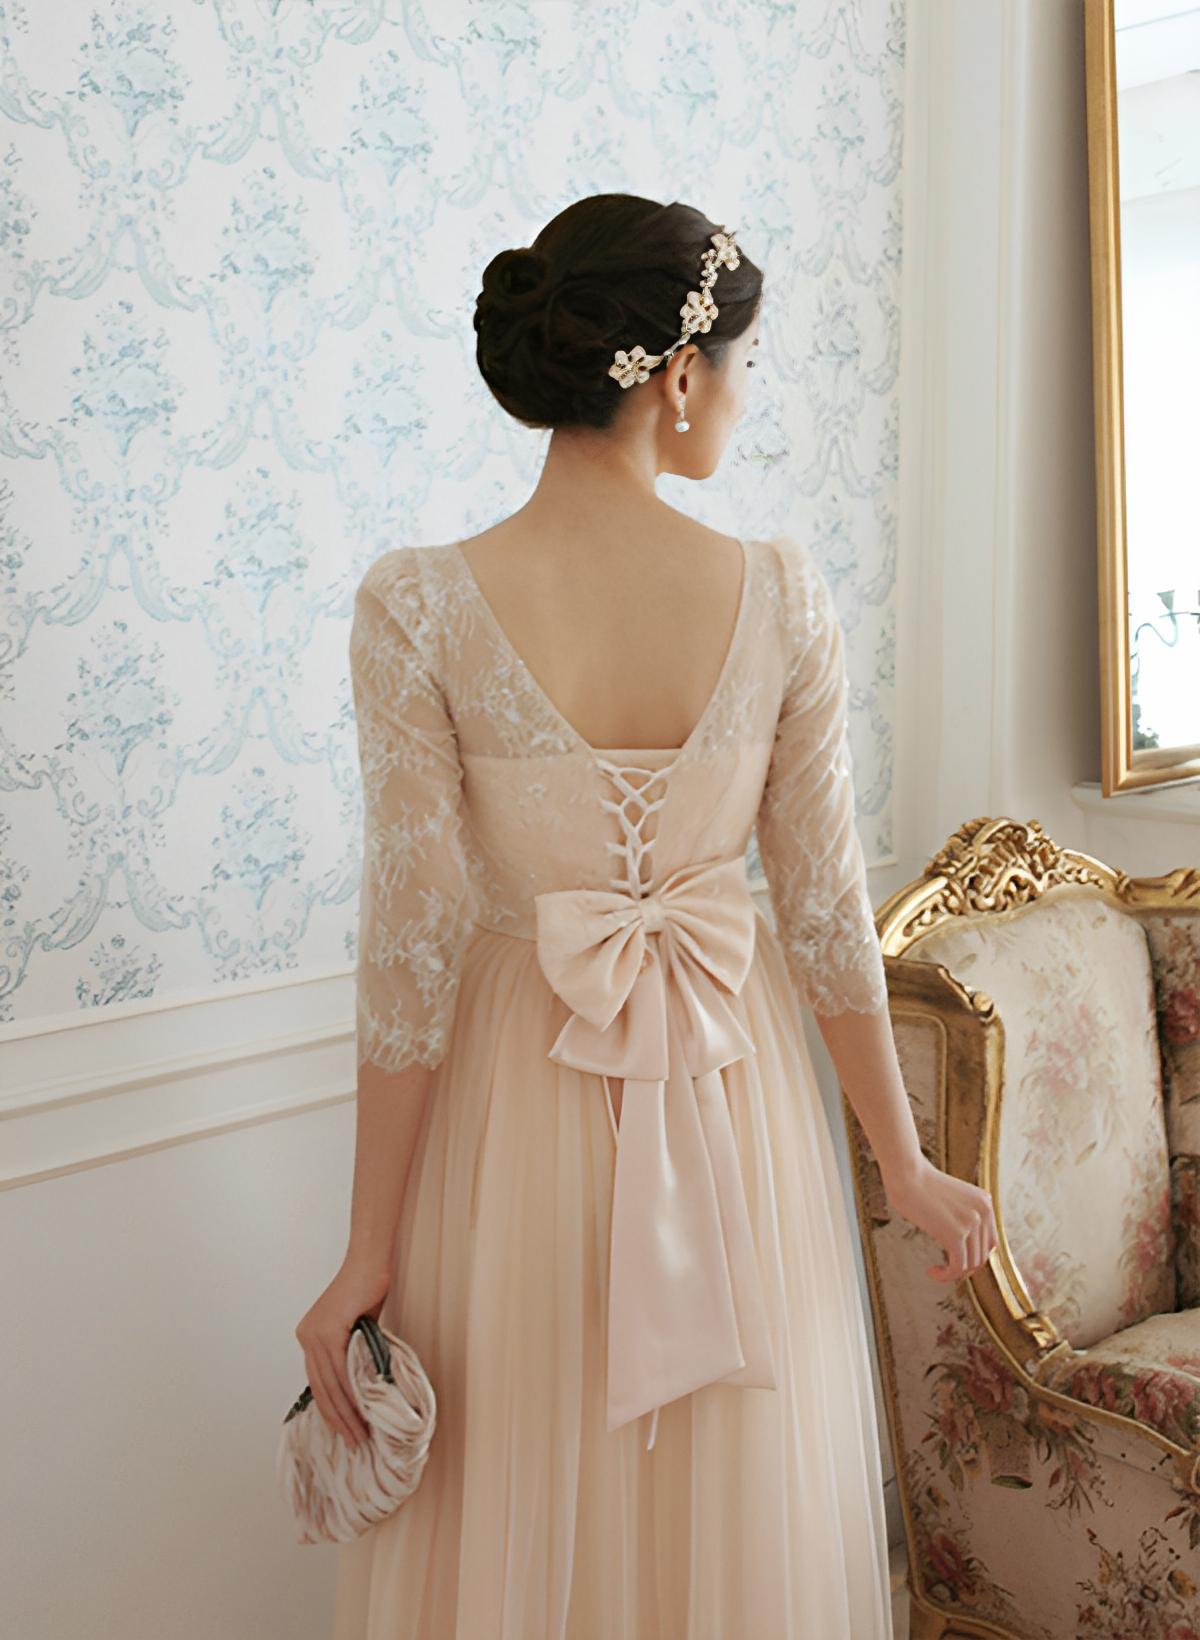 A-Line/Princess 3/4 Sleeve Scoop Neck Ankle-Length Tulle Bridesmaid Dresses With Lace Pleated